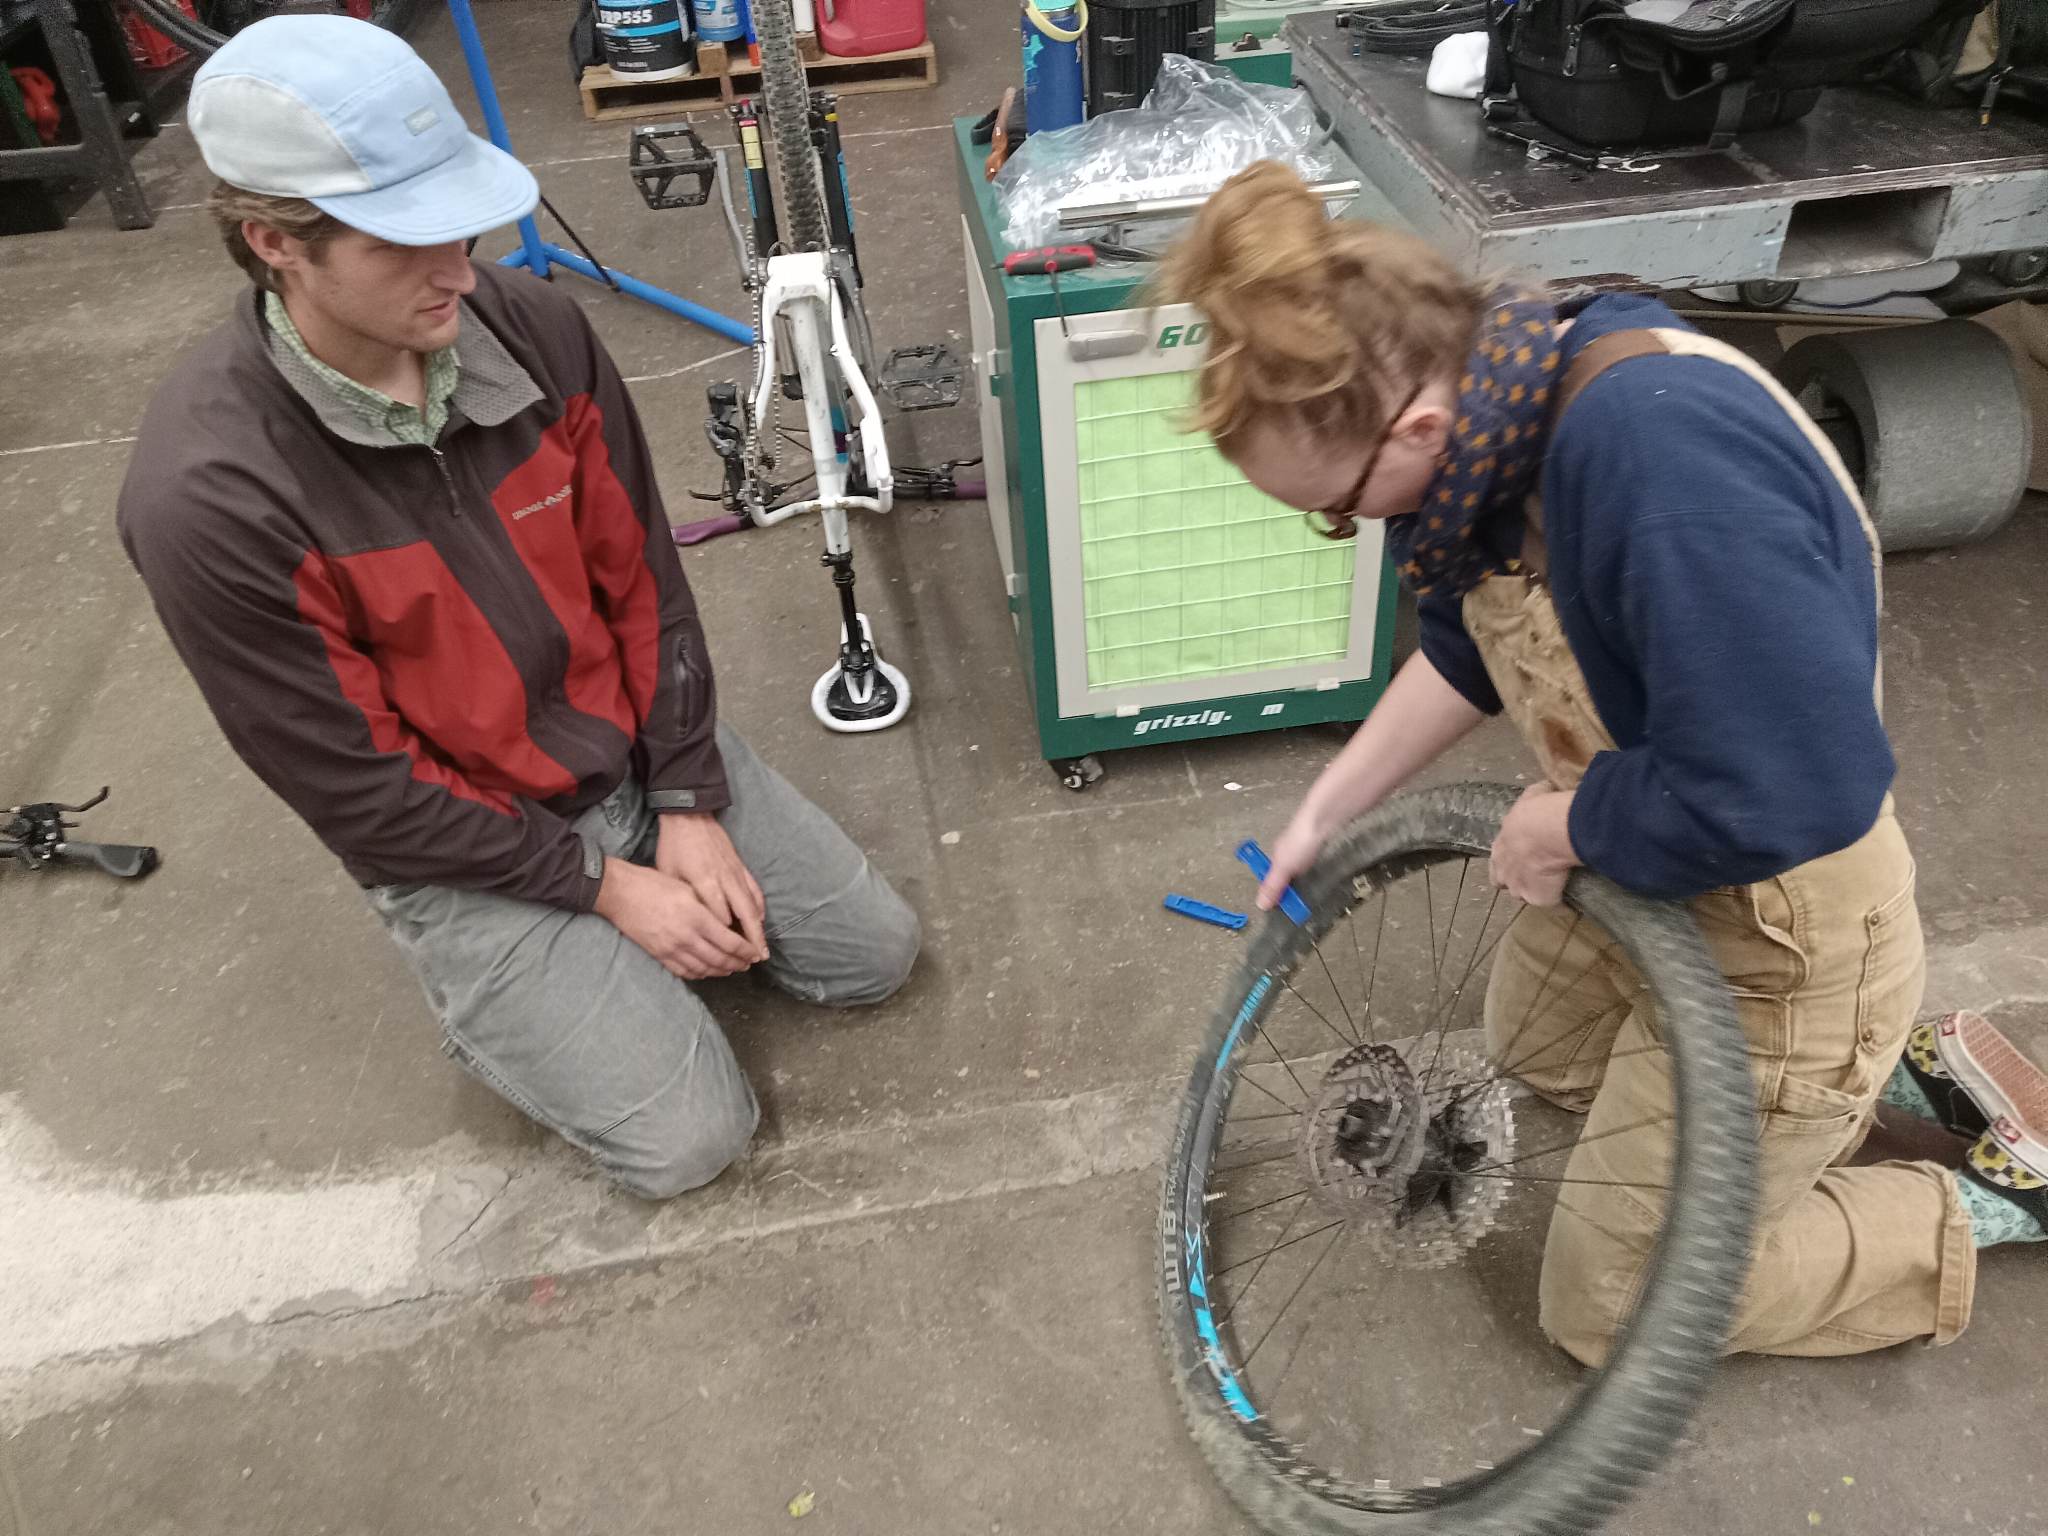 An image of two people kneeling down examining a bike tire, they are on a concrete floor.